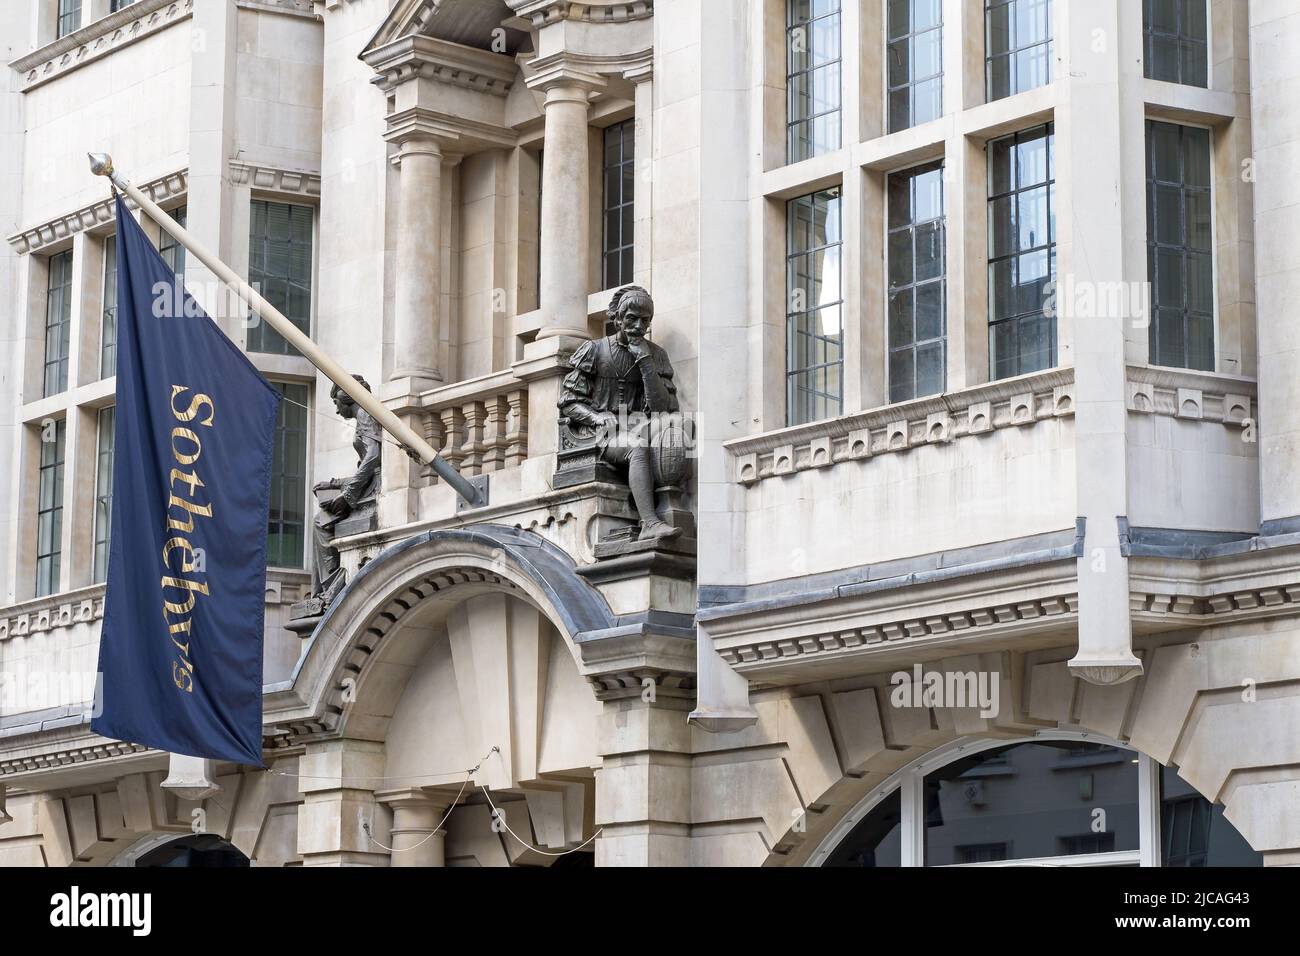 Sotheby's auction house for expensive items in London's Westend. London - 11th June 2022 Stock Photo